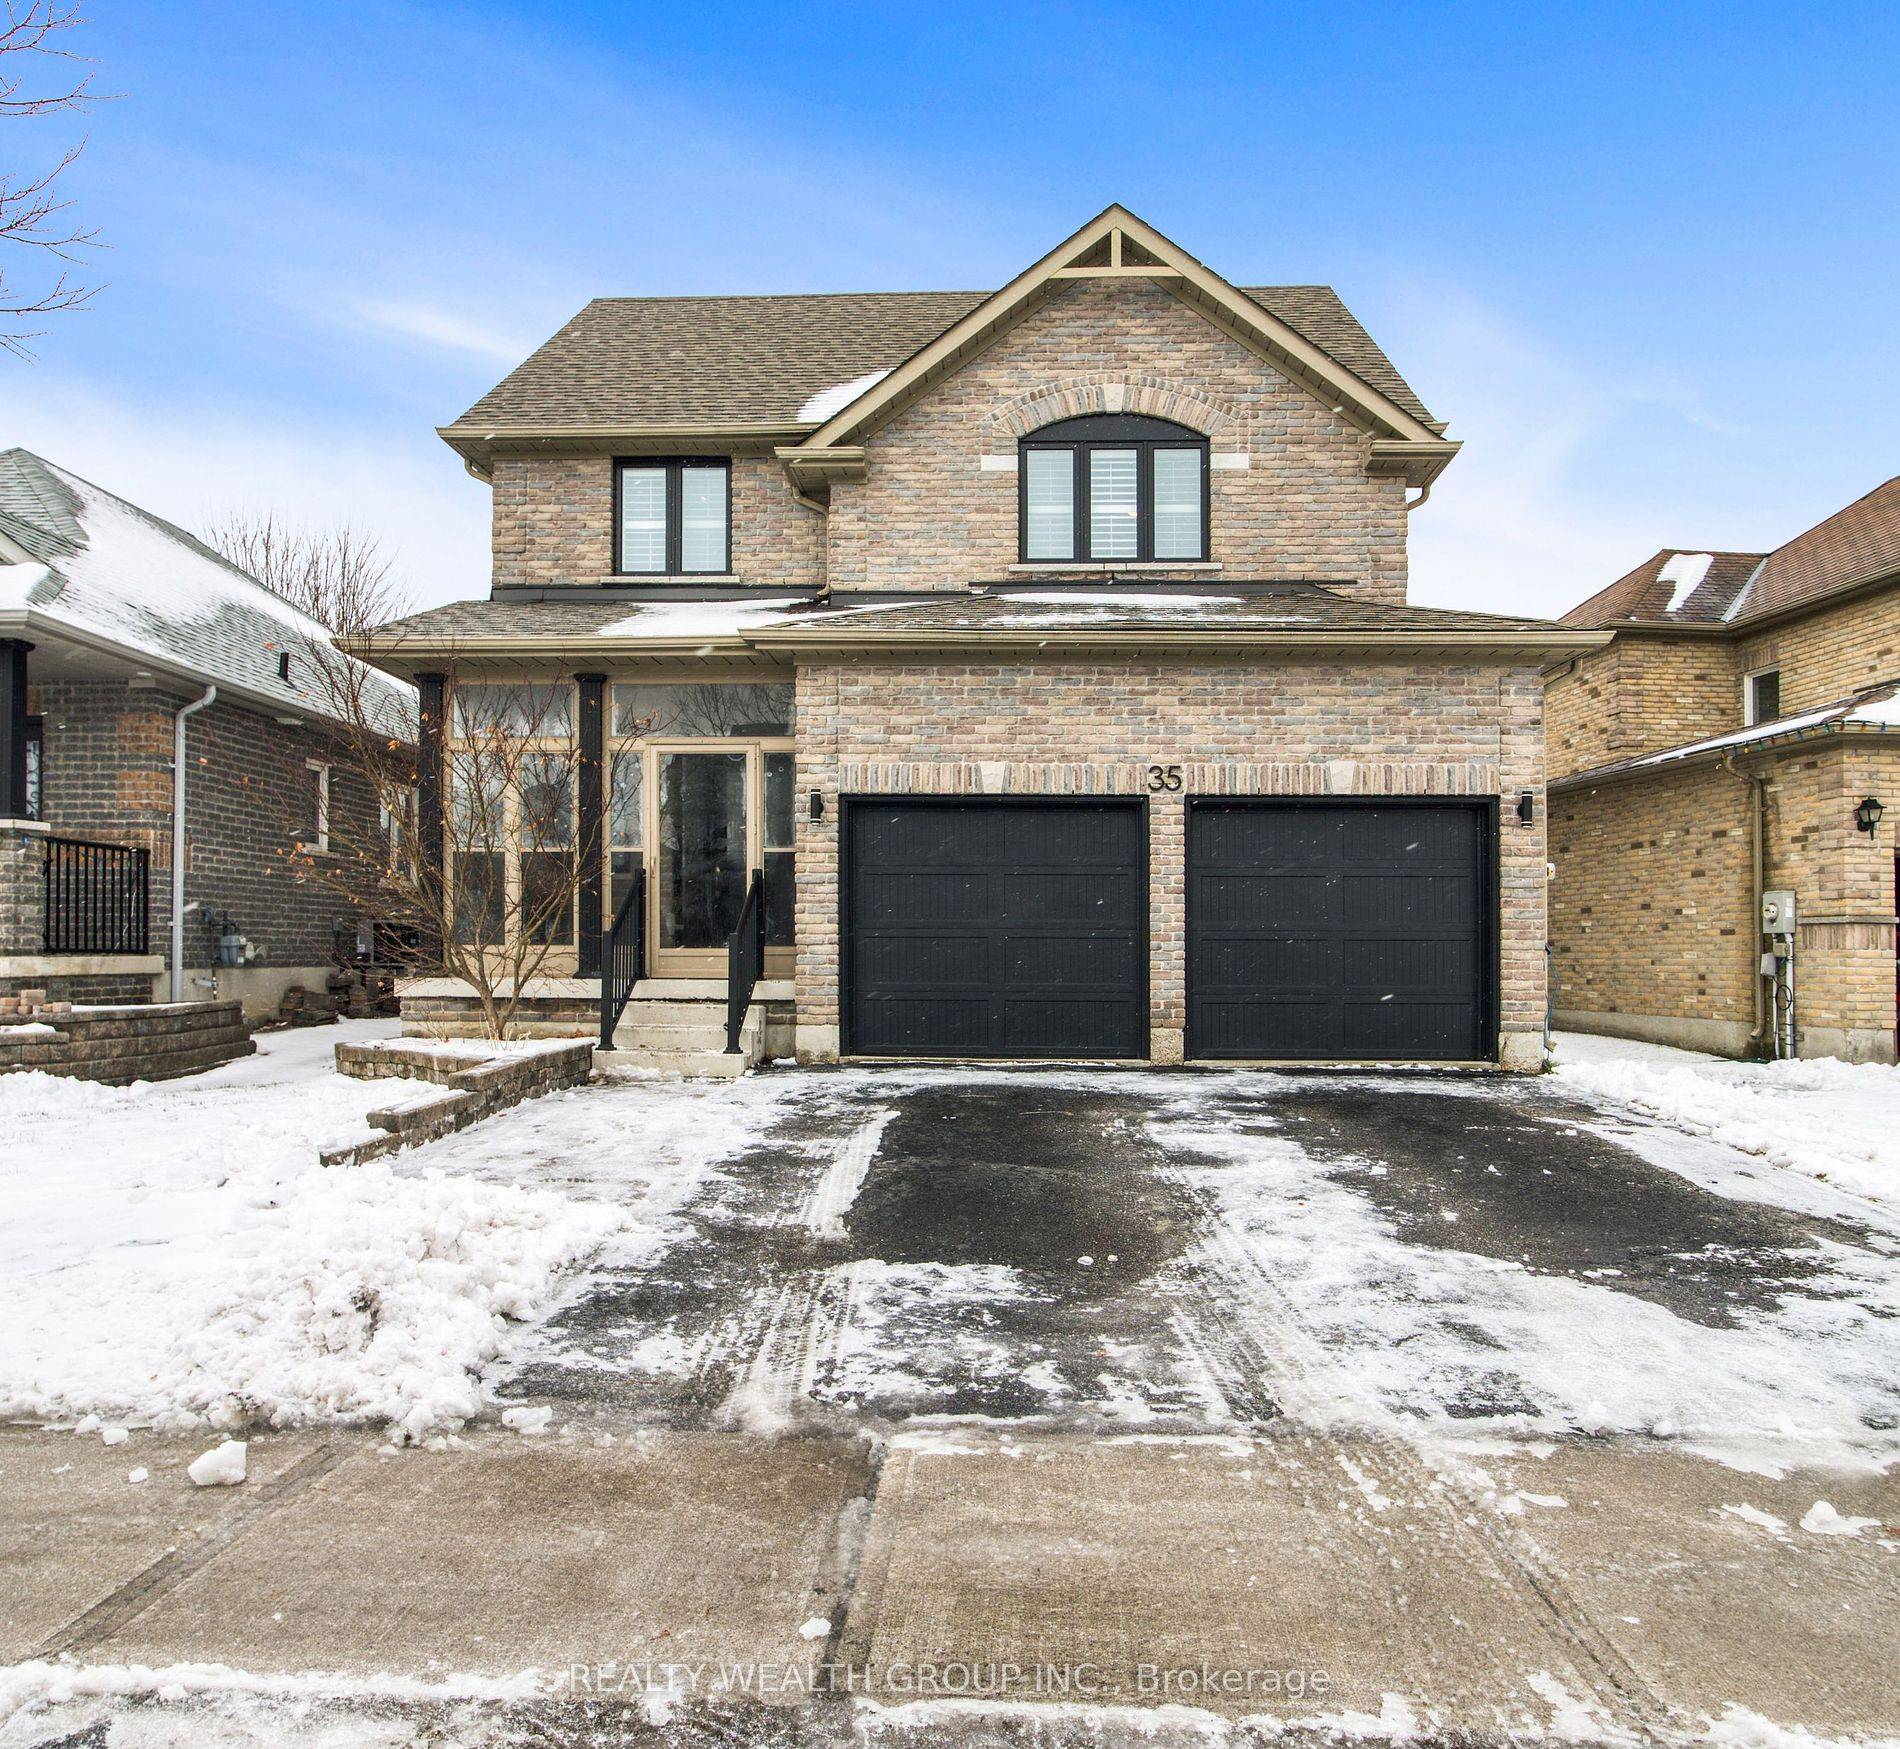 Welcome to this meticulously maintained and thoughtfully upgraded 3Bed 3Bath haven w insulated 2 car garage, boasting an array of features that blend modern elegance w functional convenience.